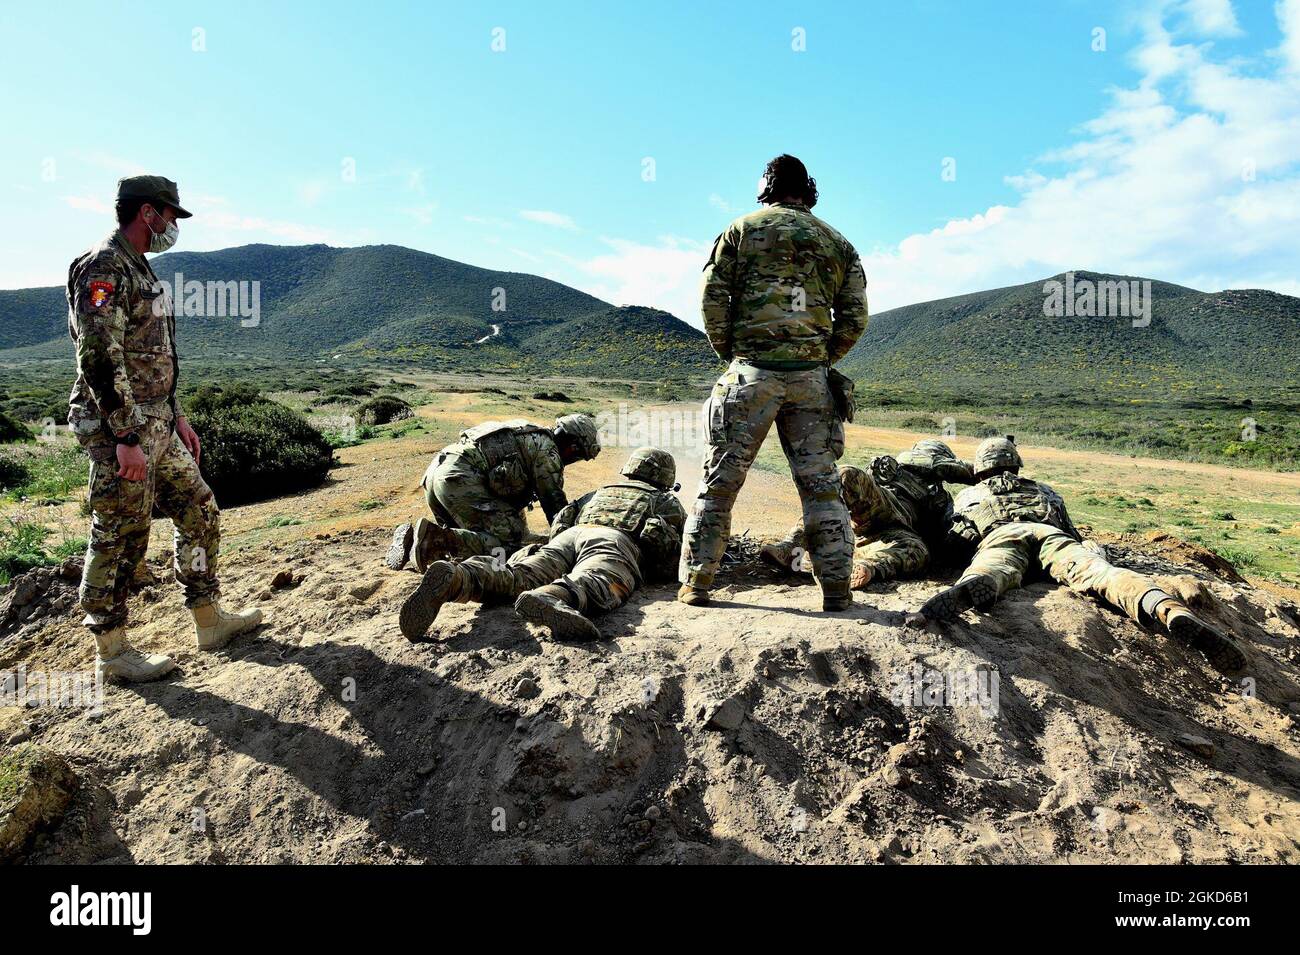 (Left) Italian paratrooper Maj. Giovanni Agosti liaison officer G3 branch SETAF Ederle Vicenza, observes the U.S. Army paratroopers assigned to Legion Company, 1-503rd Infantry Regiment,  173rd Airborne Brigade during M240 machine gun long range marksmanship as part of Eagle Pangea in the Italian Army Capo Teulada Major Training Area on the island of Sardinia, Italy Mar. 18, 2021 under Covid-19 prevention conditions. Exercise Eagle Pangea is a 1-503rd IN squad live fire and platoon external evaluation training event. The 173rd Airborne Brigade is the U.S. Army's Contingency Response Force in E Stock Photo